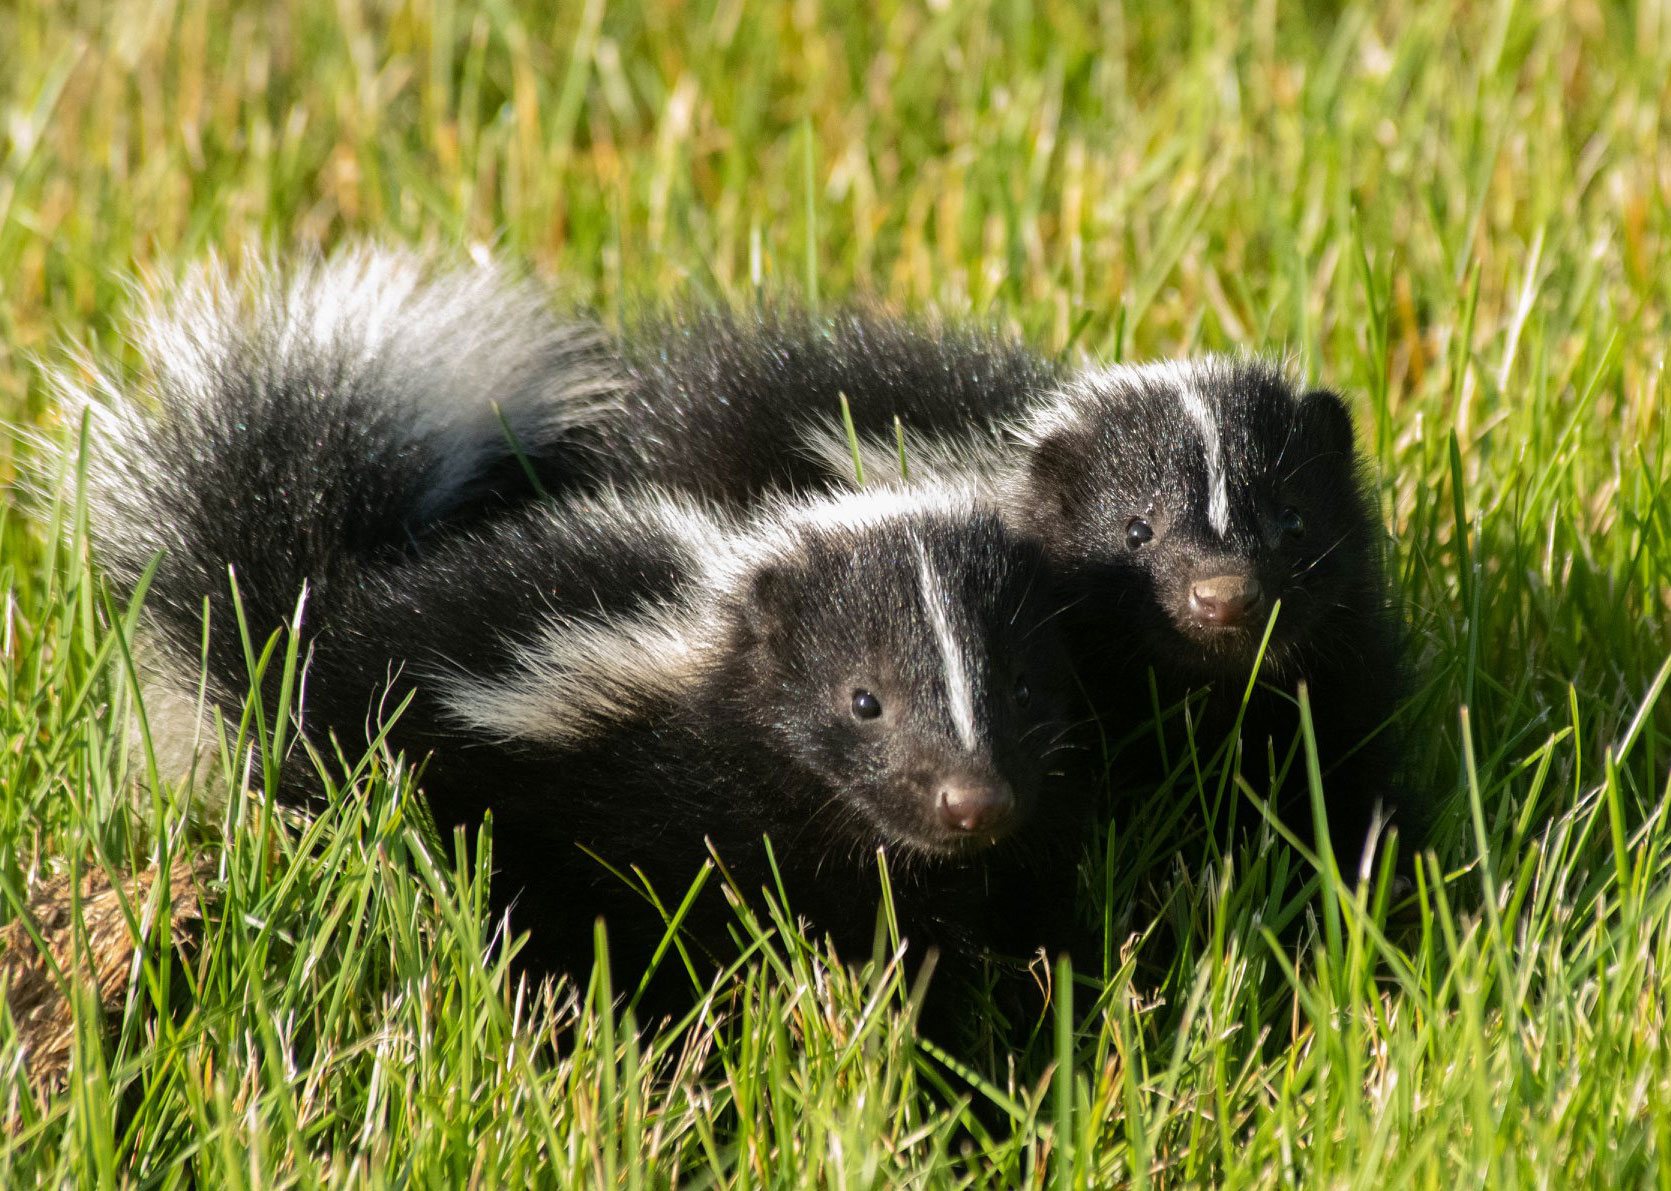 Two young skunks in the grass.